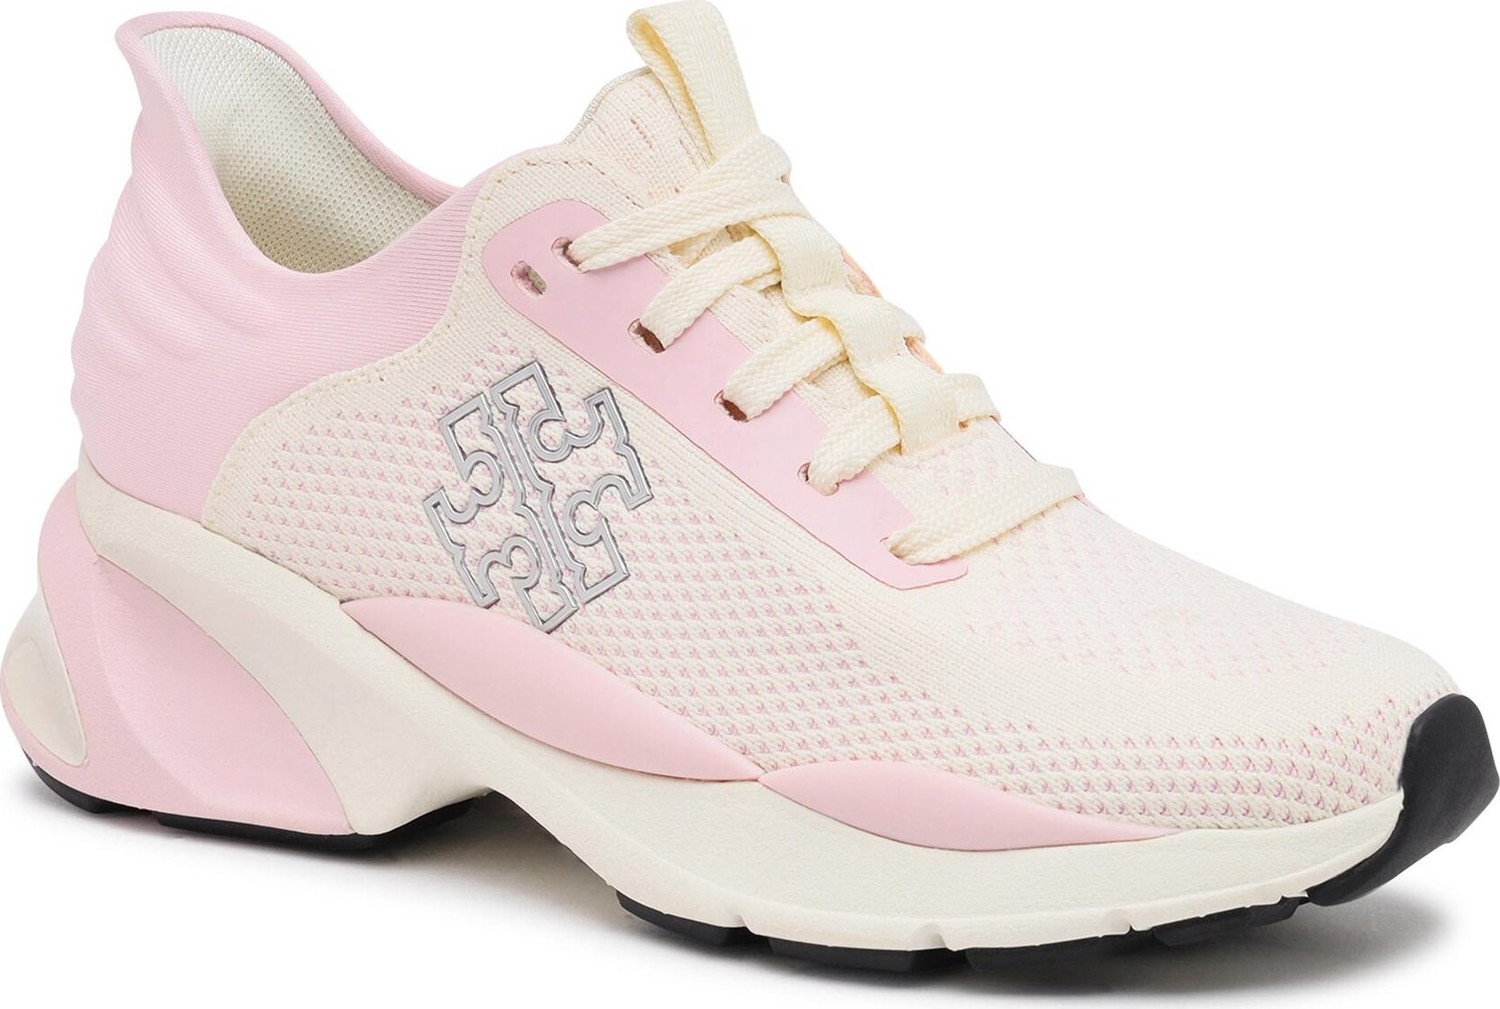 Sneakersy Tory Burch Good Luck 149289 Pink Plie/New Ivory 650